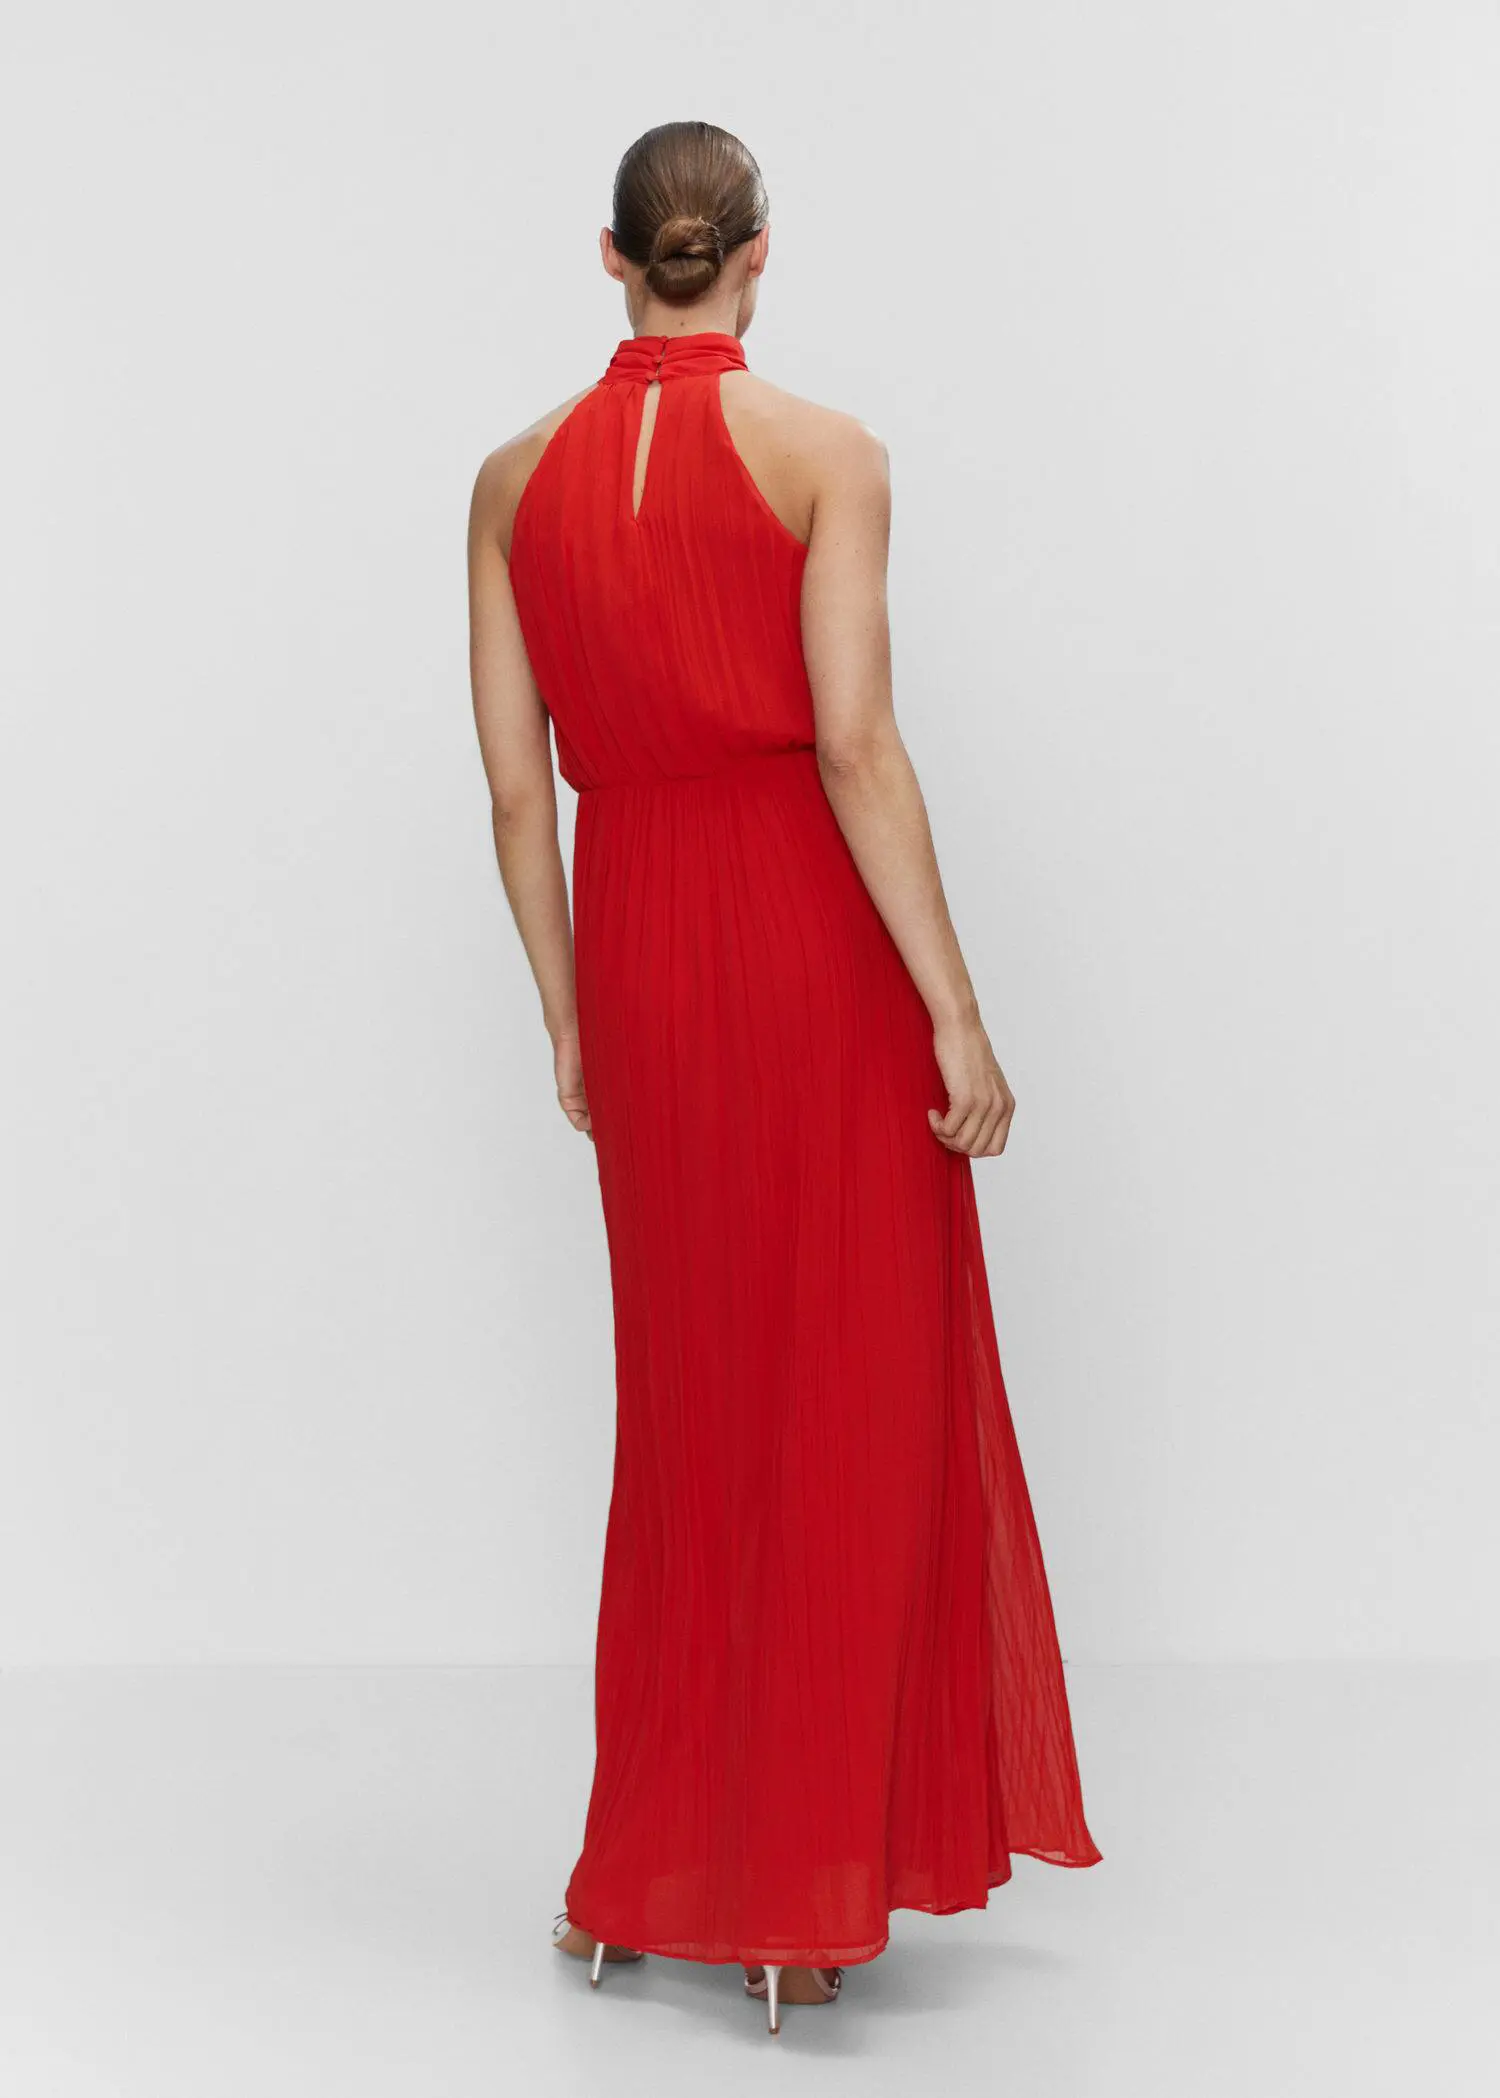 Mango Pleated halter neck dress. a woman wearing a red dress standing in a room. 